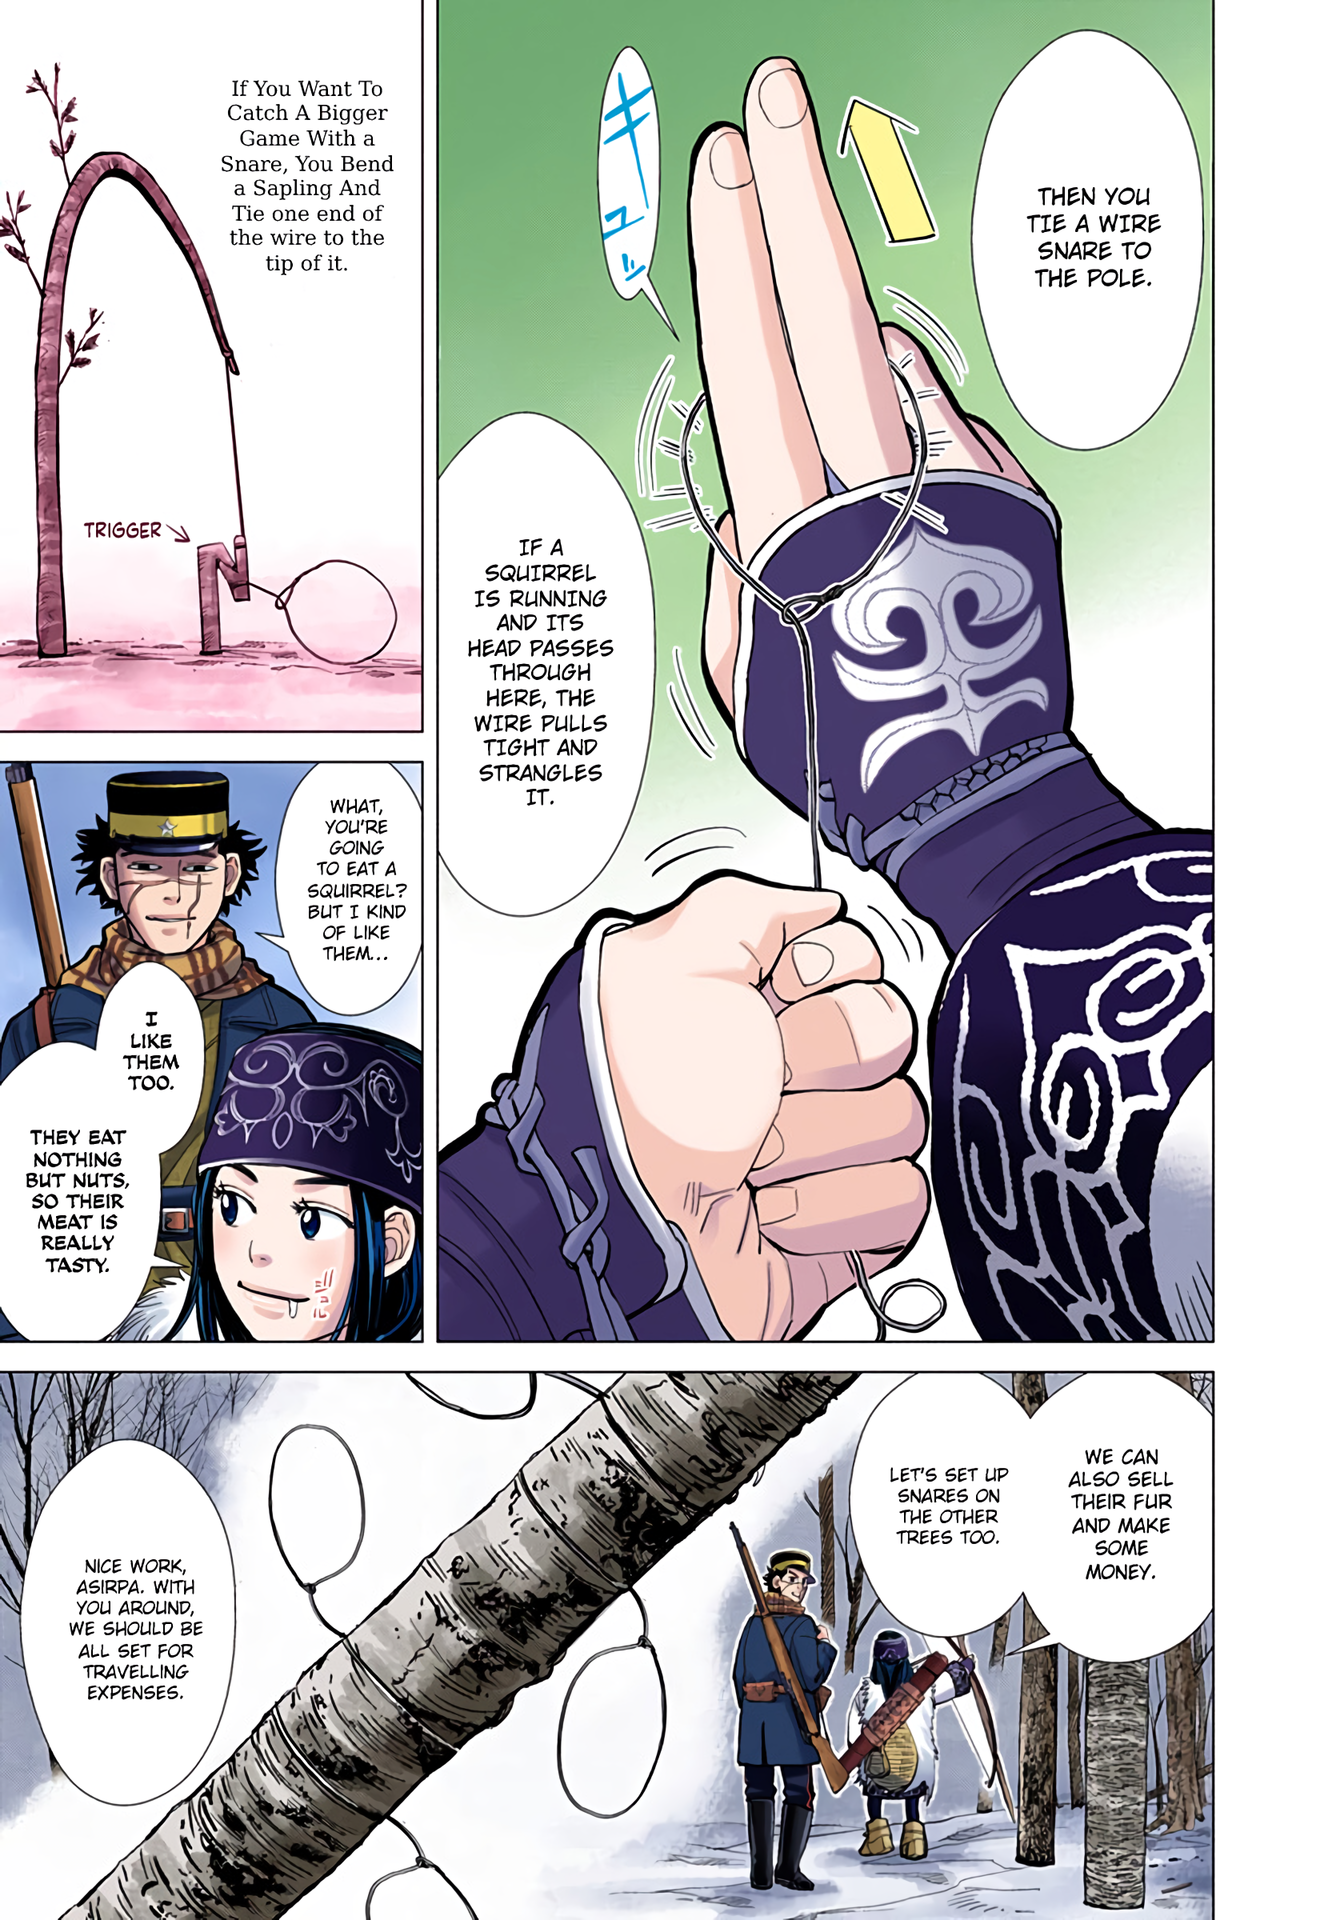 Golden Kamuy - Digital Colored Comics Vol.1 Chapter 3: Trap - Picture 3